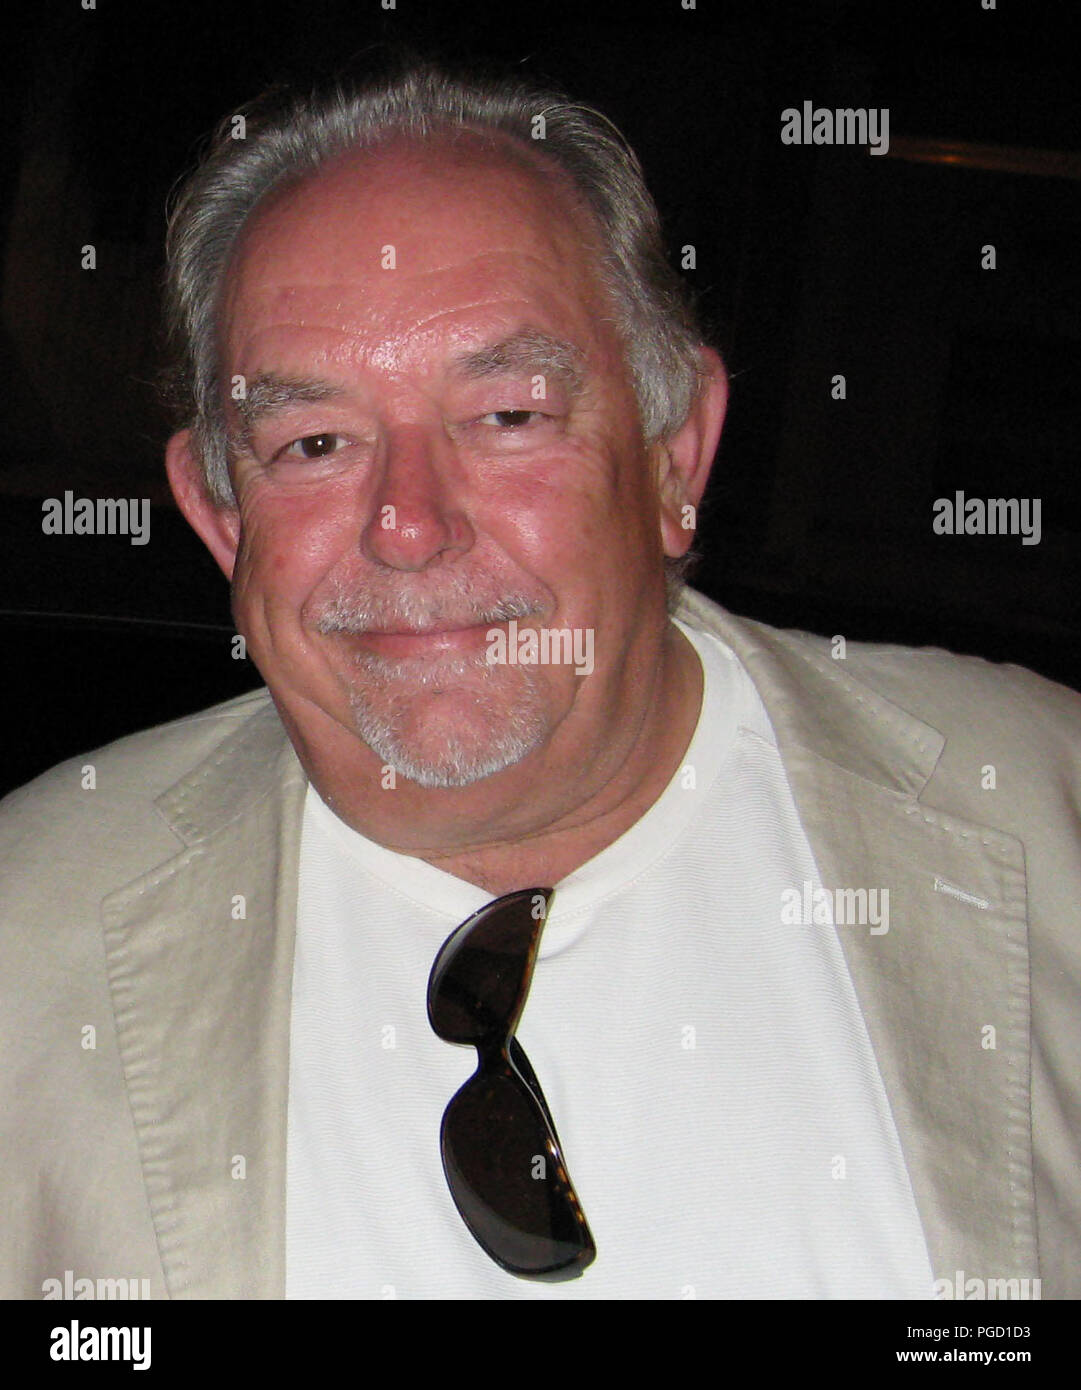 MIAMI - 2007: (EXCLUSIVE COVERAGE) Robin Leach out and about in Miami Florida in 2007 People: Robin Leach   Credit: Hoo-me.com/MediaPunch Stock Photo